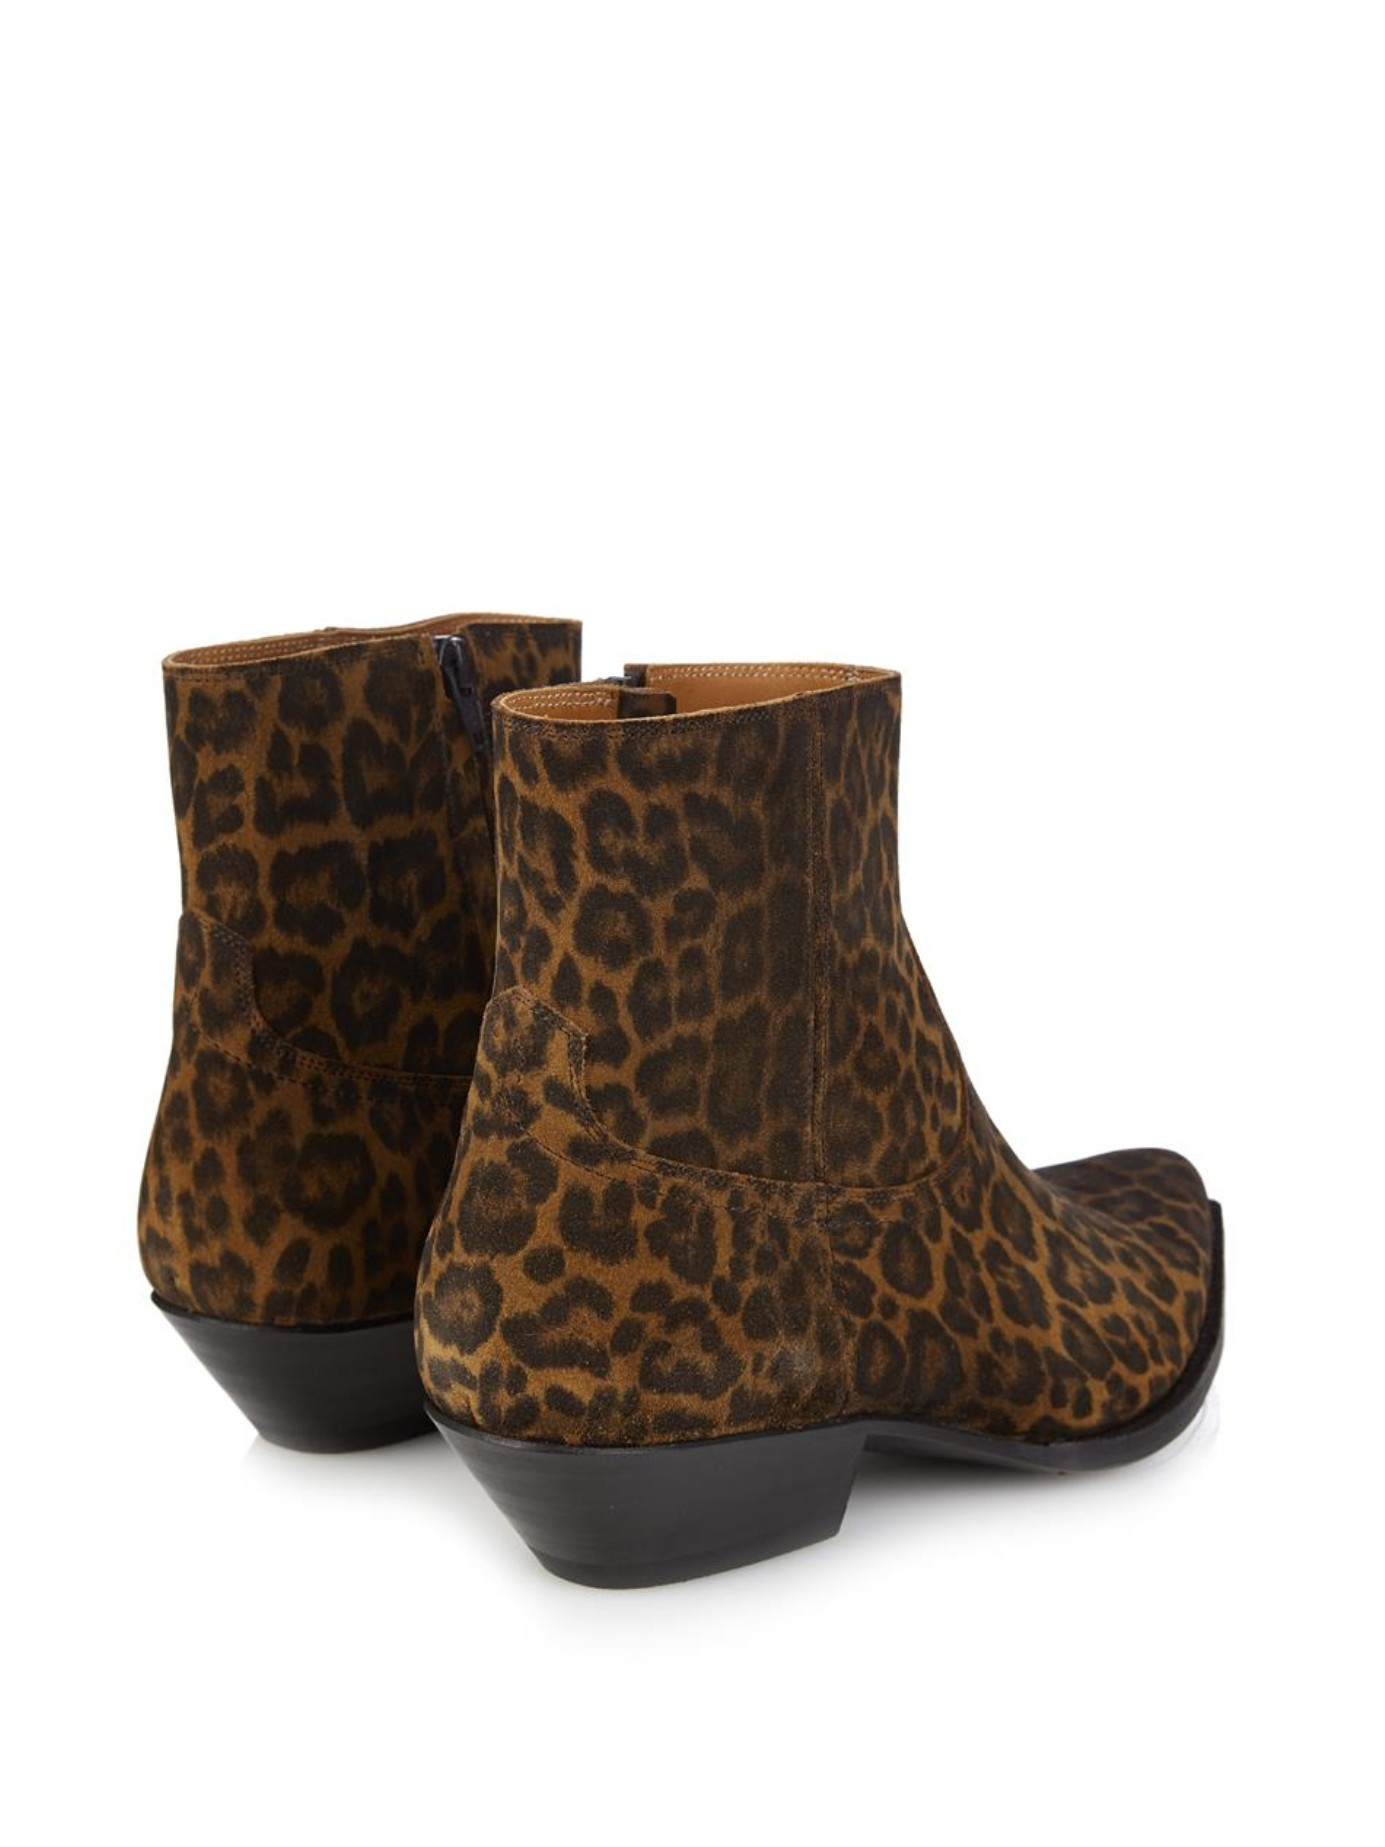 Saint Laurent LeopardPrint Suede Ankle Boots in Brown for